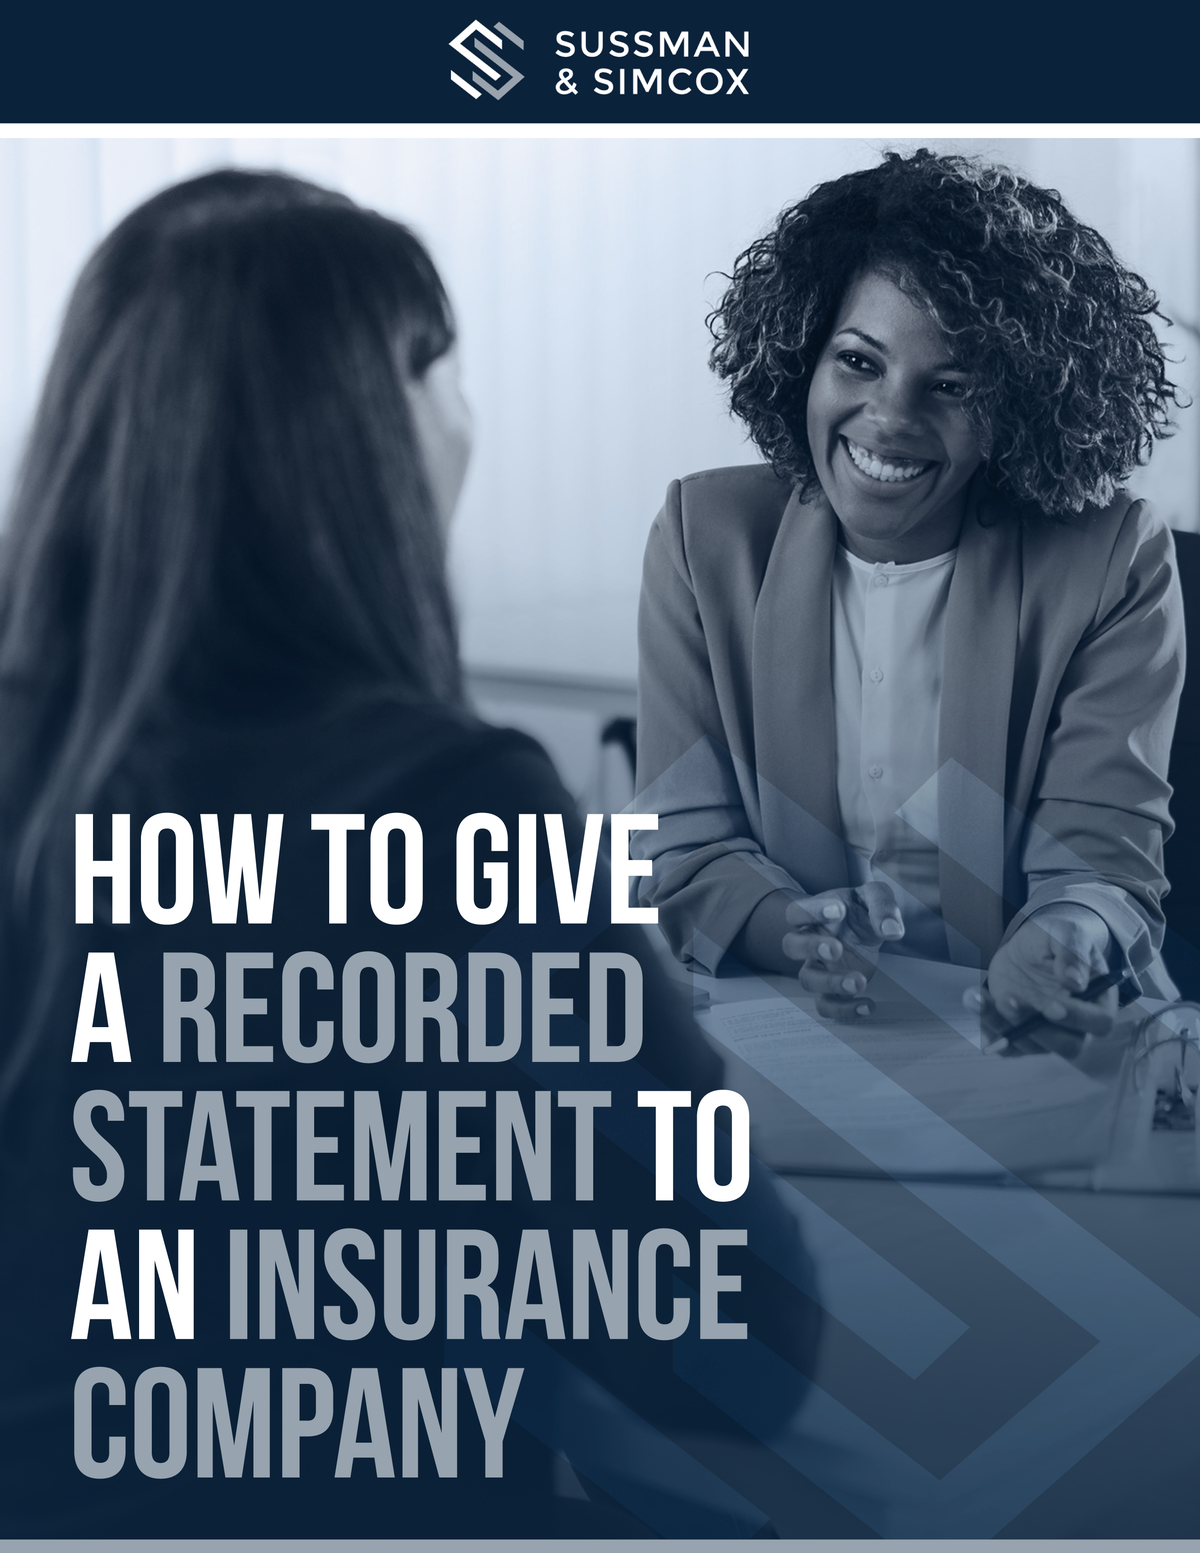 How to Give a Recorded Statement to An Insurance Company